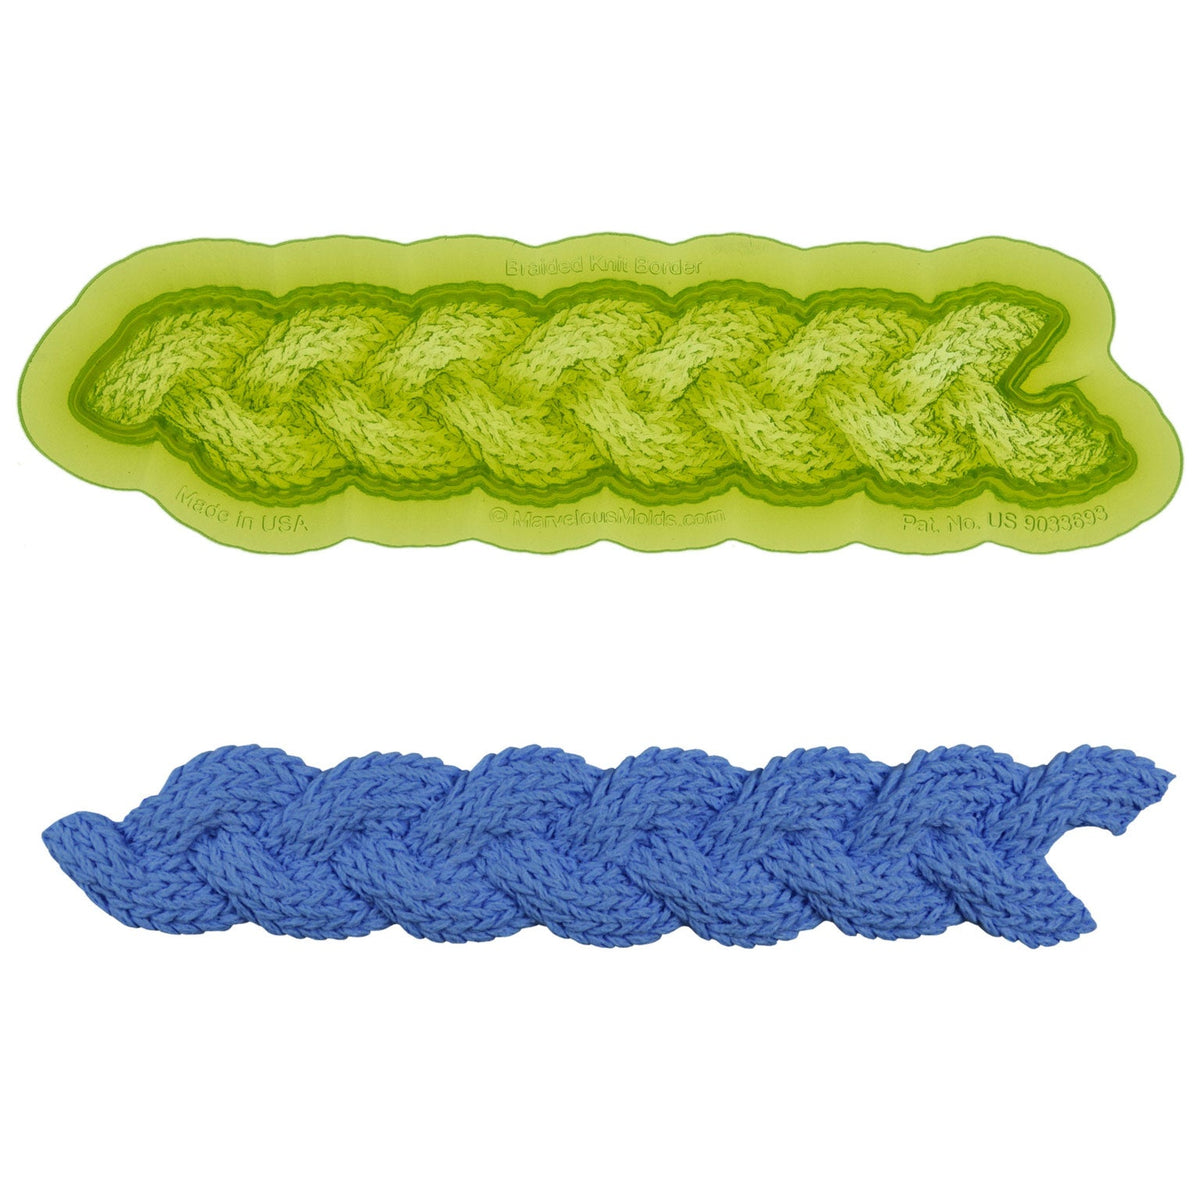 Braided Knit Border Food Safe Silicone Mold for Fondant Cake Decorating by Marvelous Molds